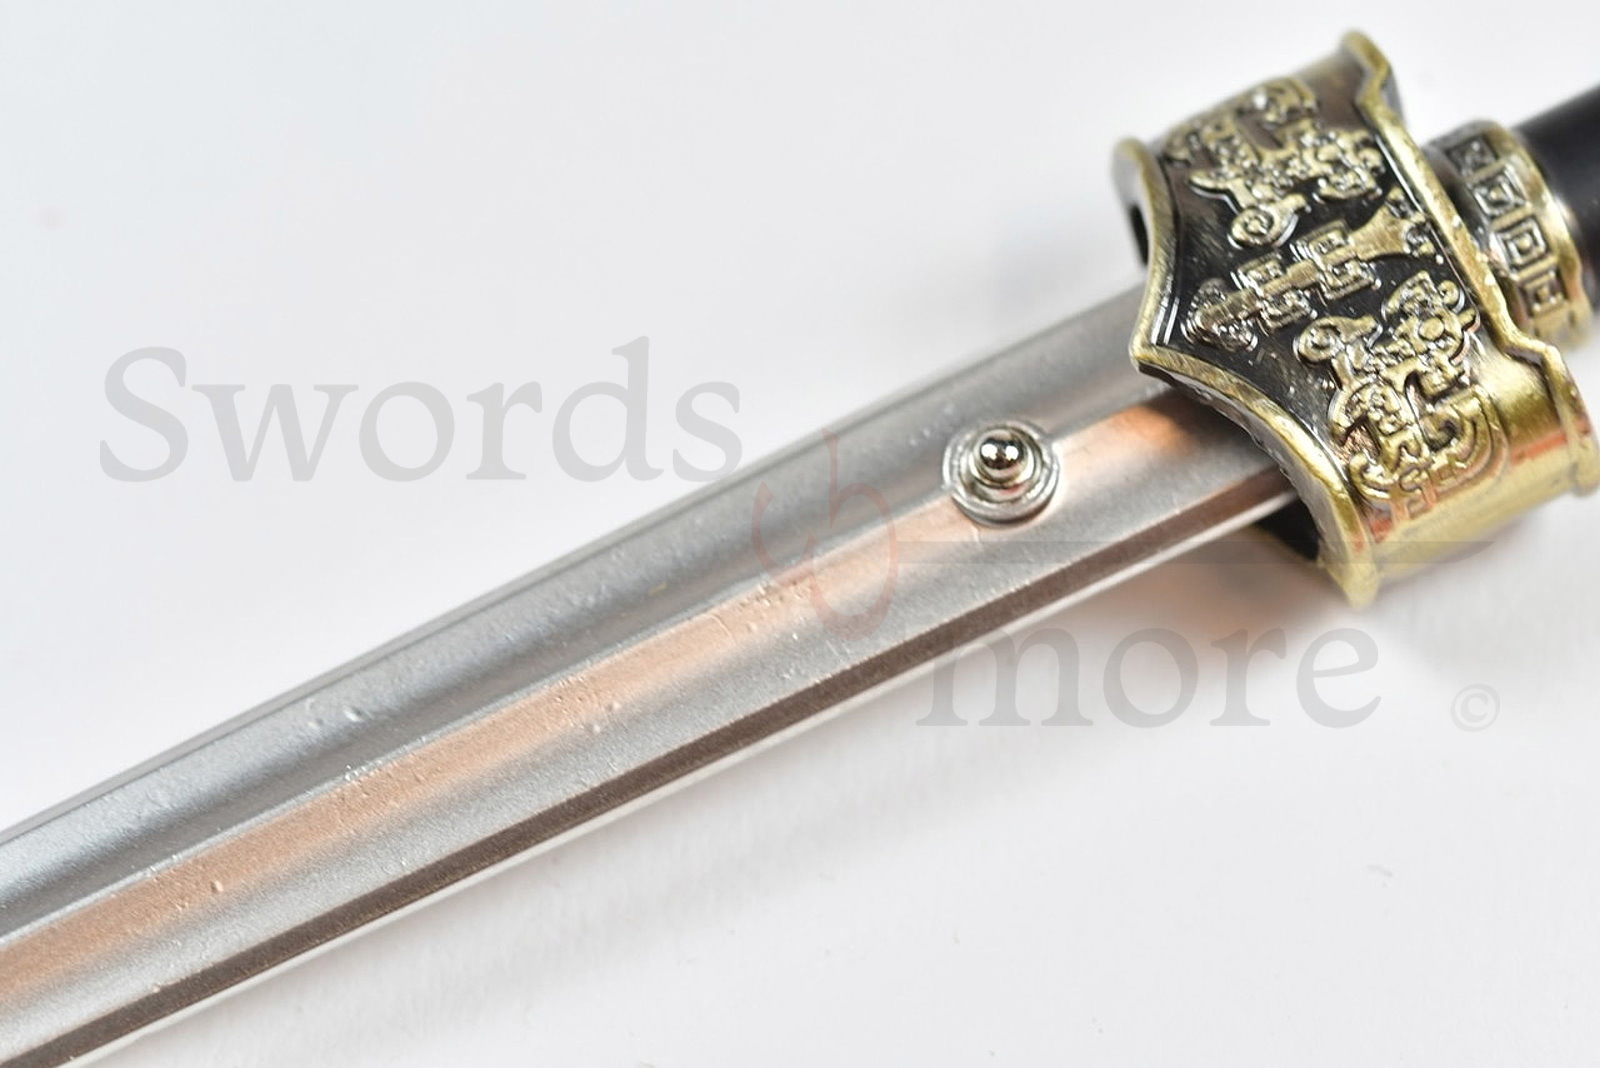 Sword of Goujian - Jian sword, letter opener with scabbard and stand 